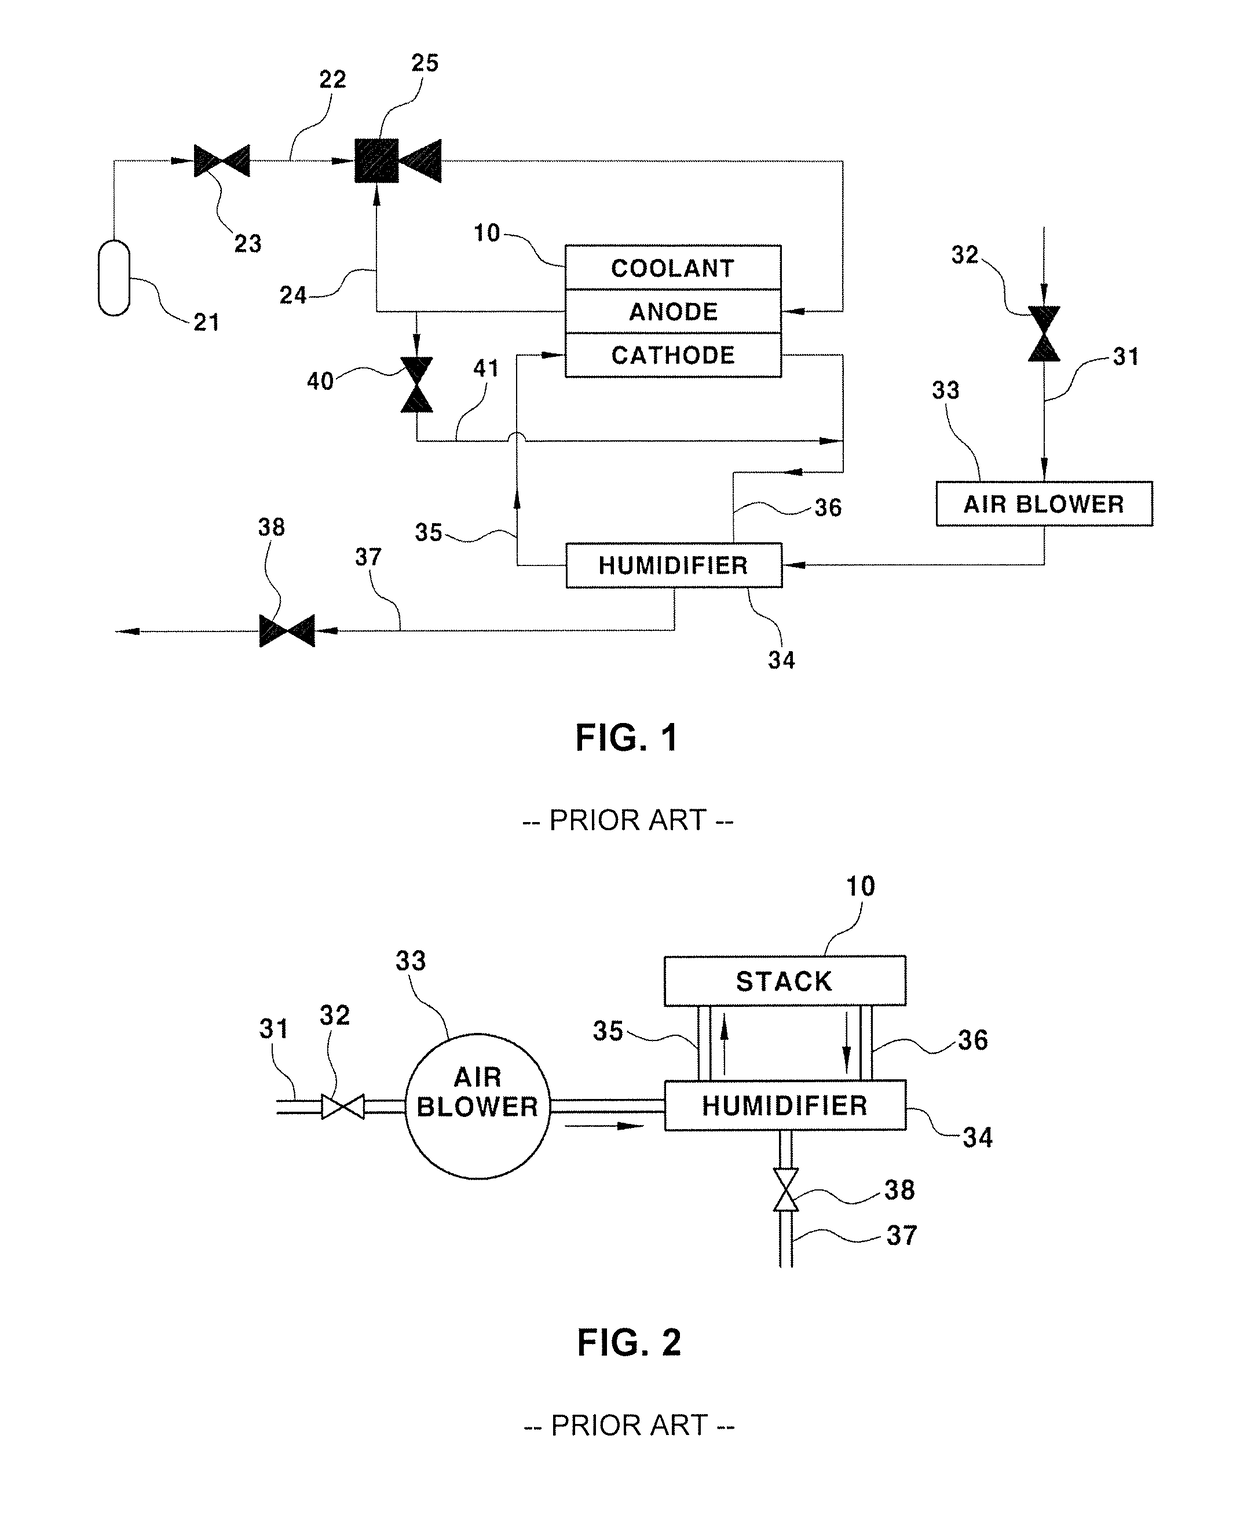 Fuel cell system having valve module between fuel cell stack and humidifier